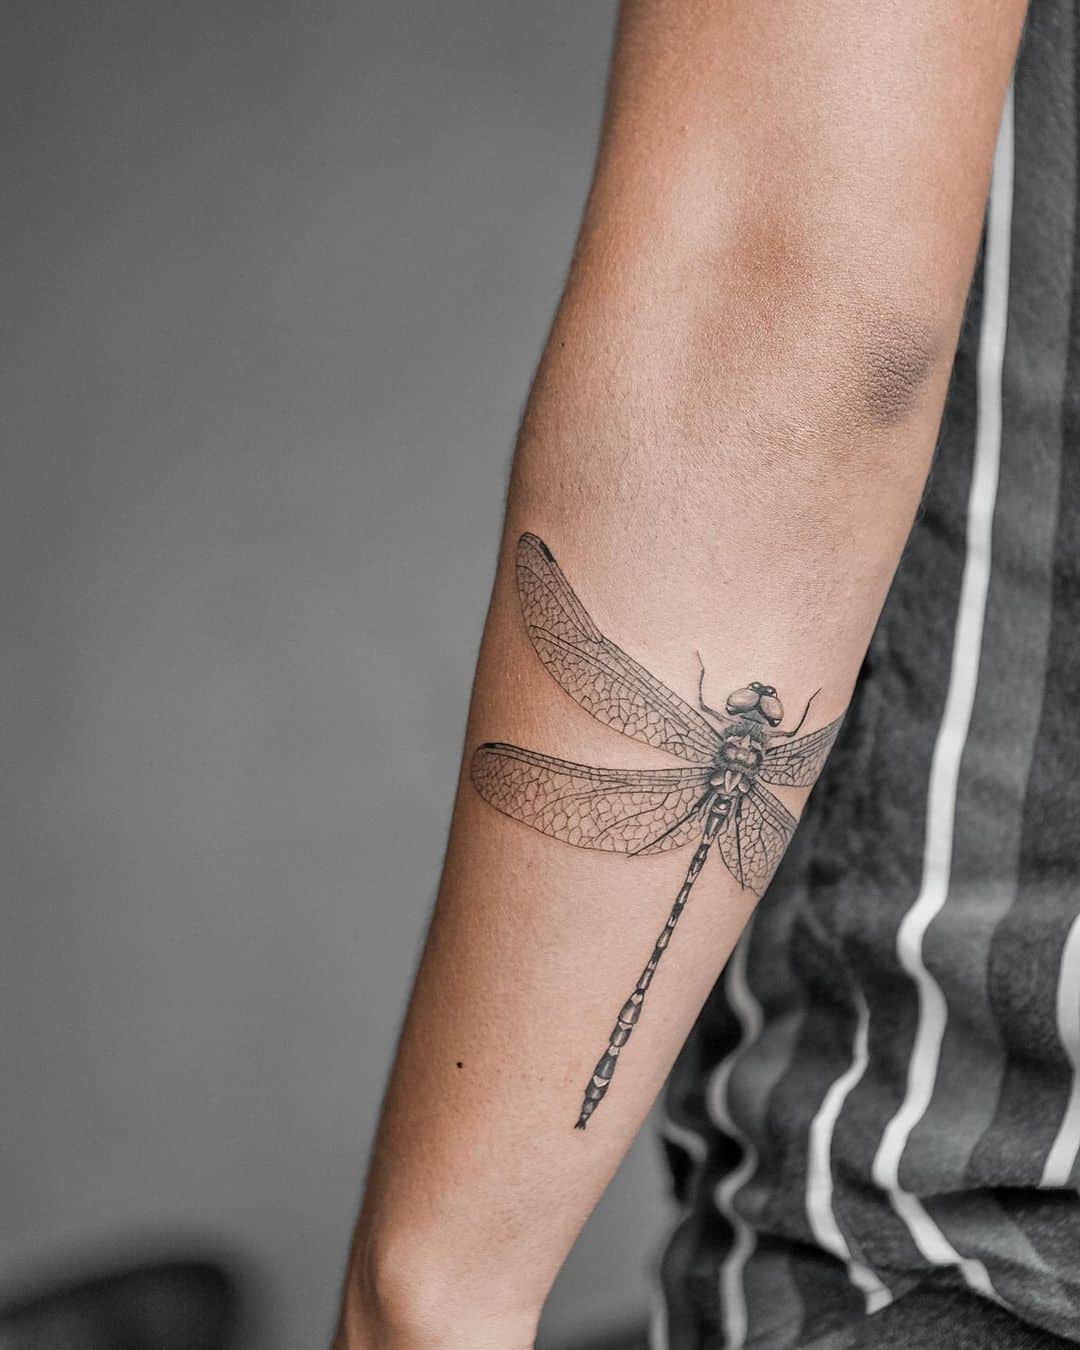 85 Mind-Blowing Dragonfly Tattoos And Their Meaning - AuthorityTattoo